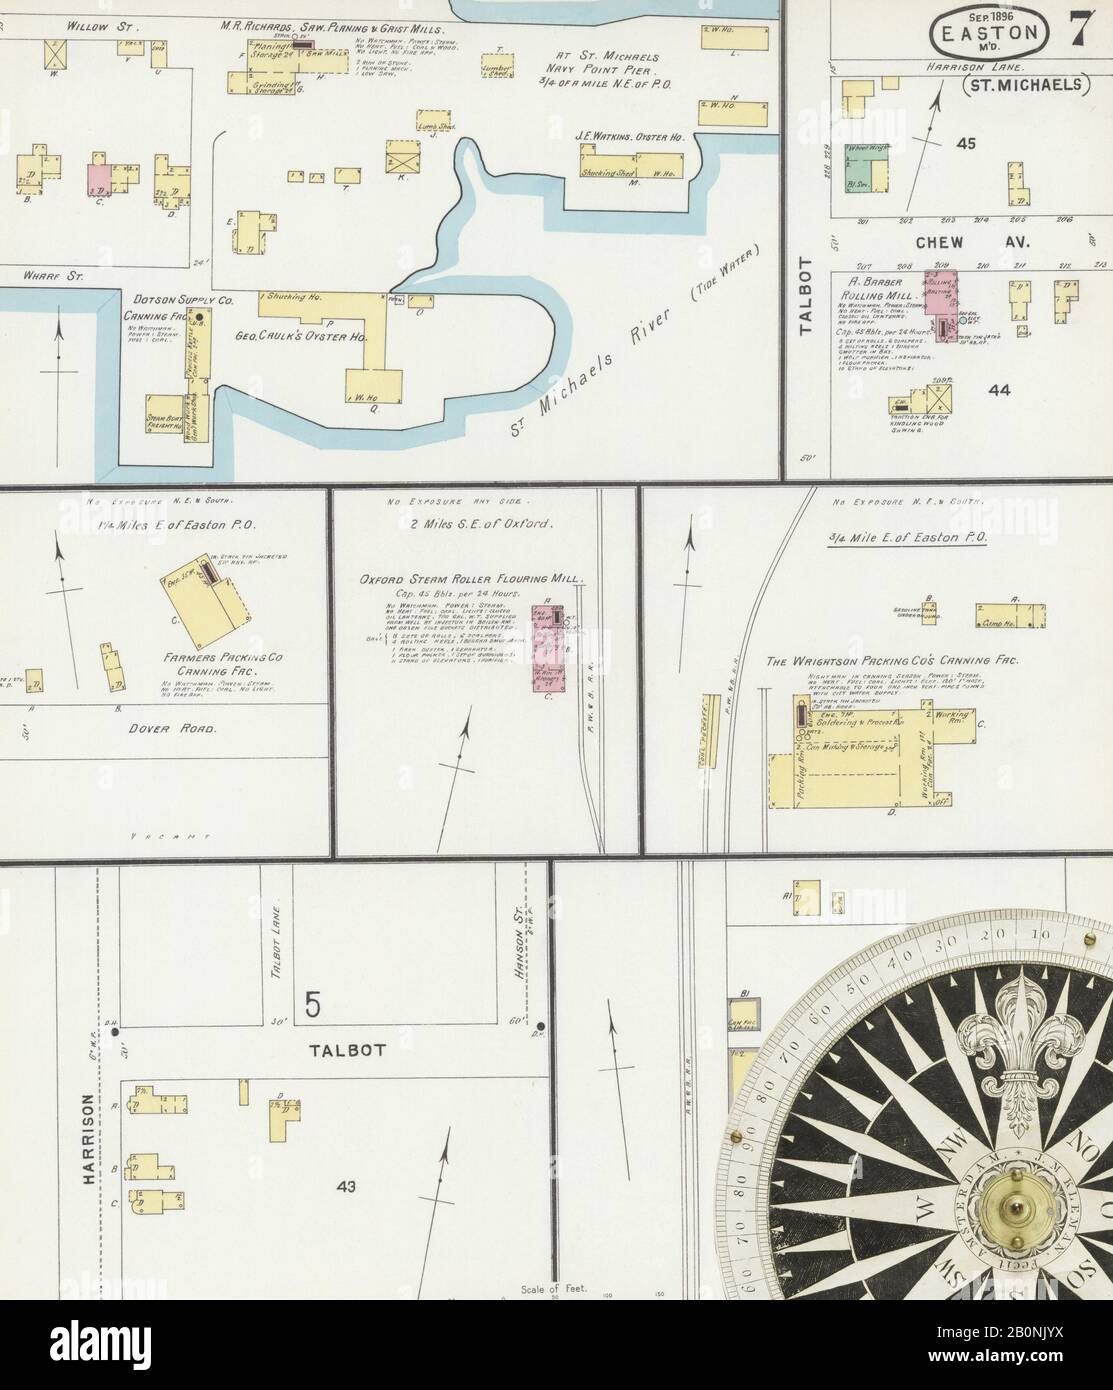 Image 7 of Sanborn Fire Insurance Map from Easton, Talbot County, Maryland. Sep 1896. 13 Sheet(s). Includes Saint Michaels, Oxford, Trappe, America, street map with a Nineteenth Century compass Stock Photo